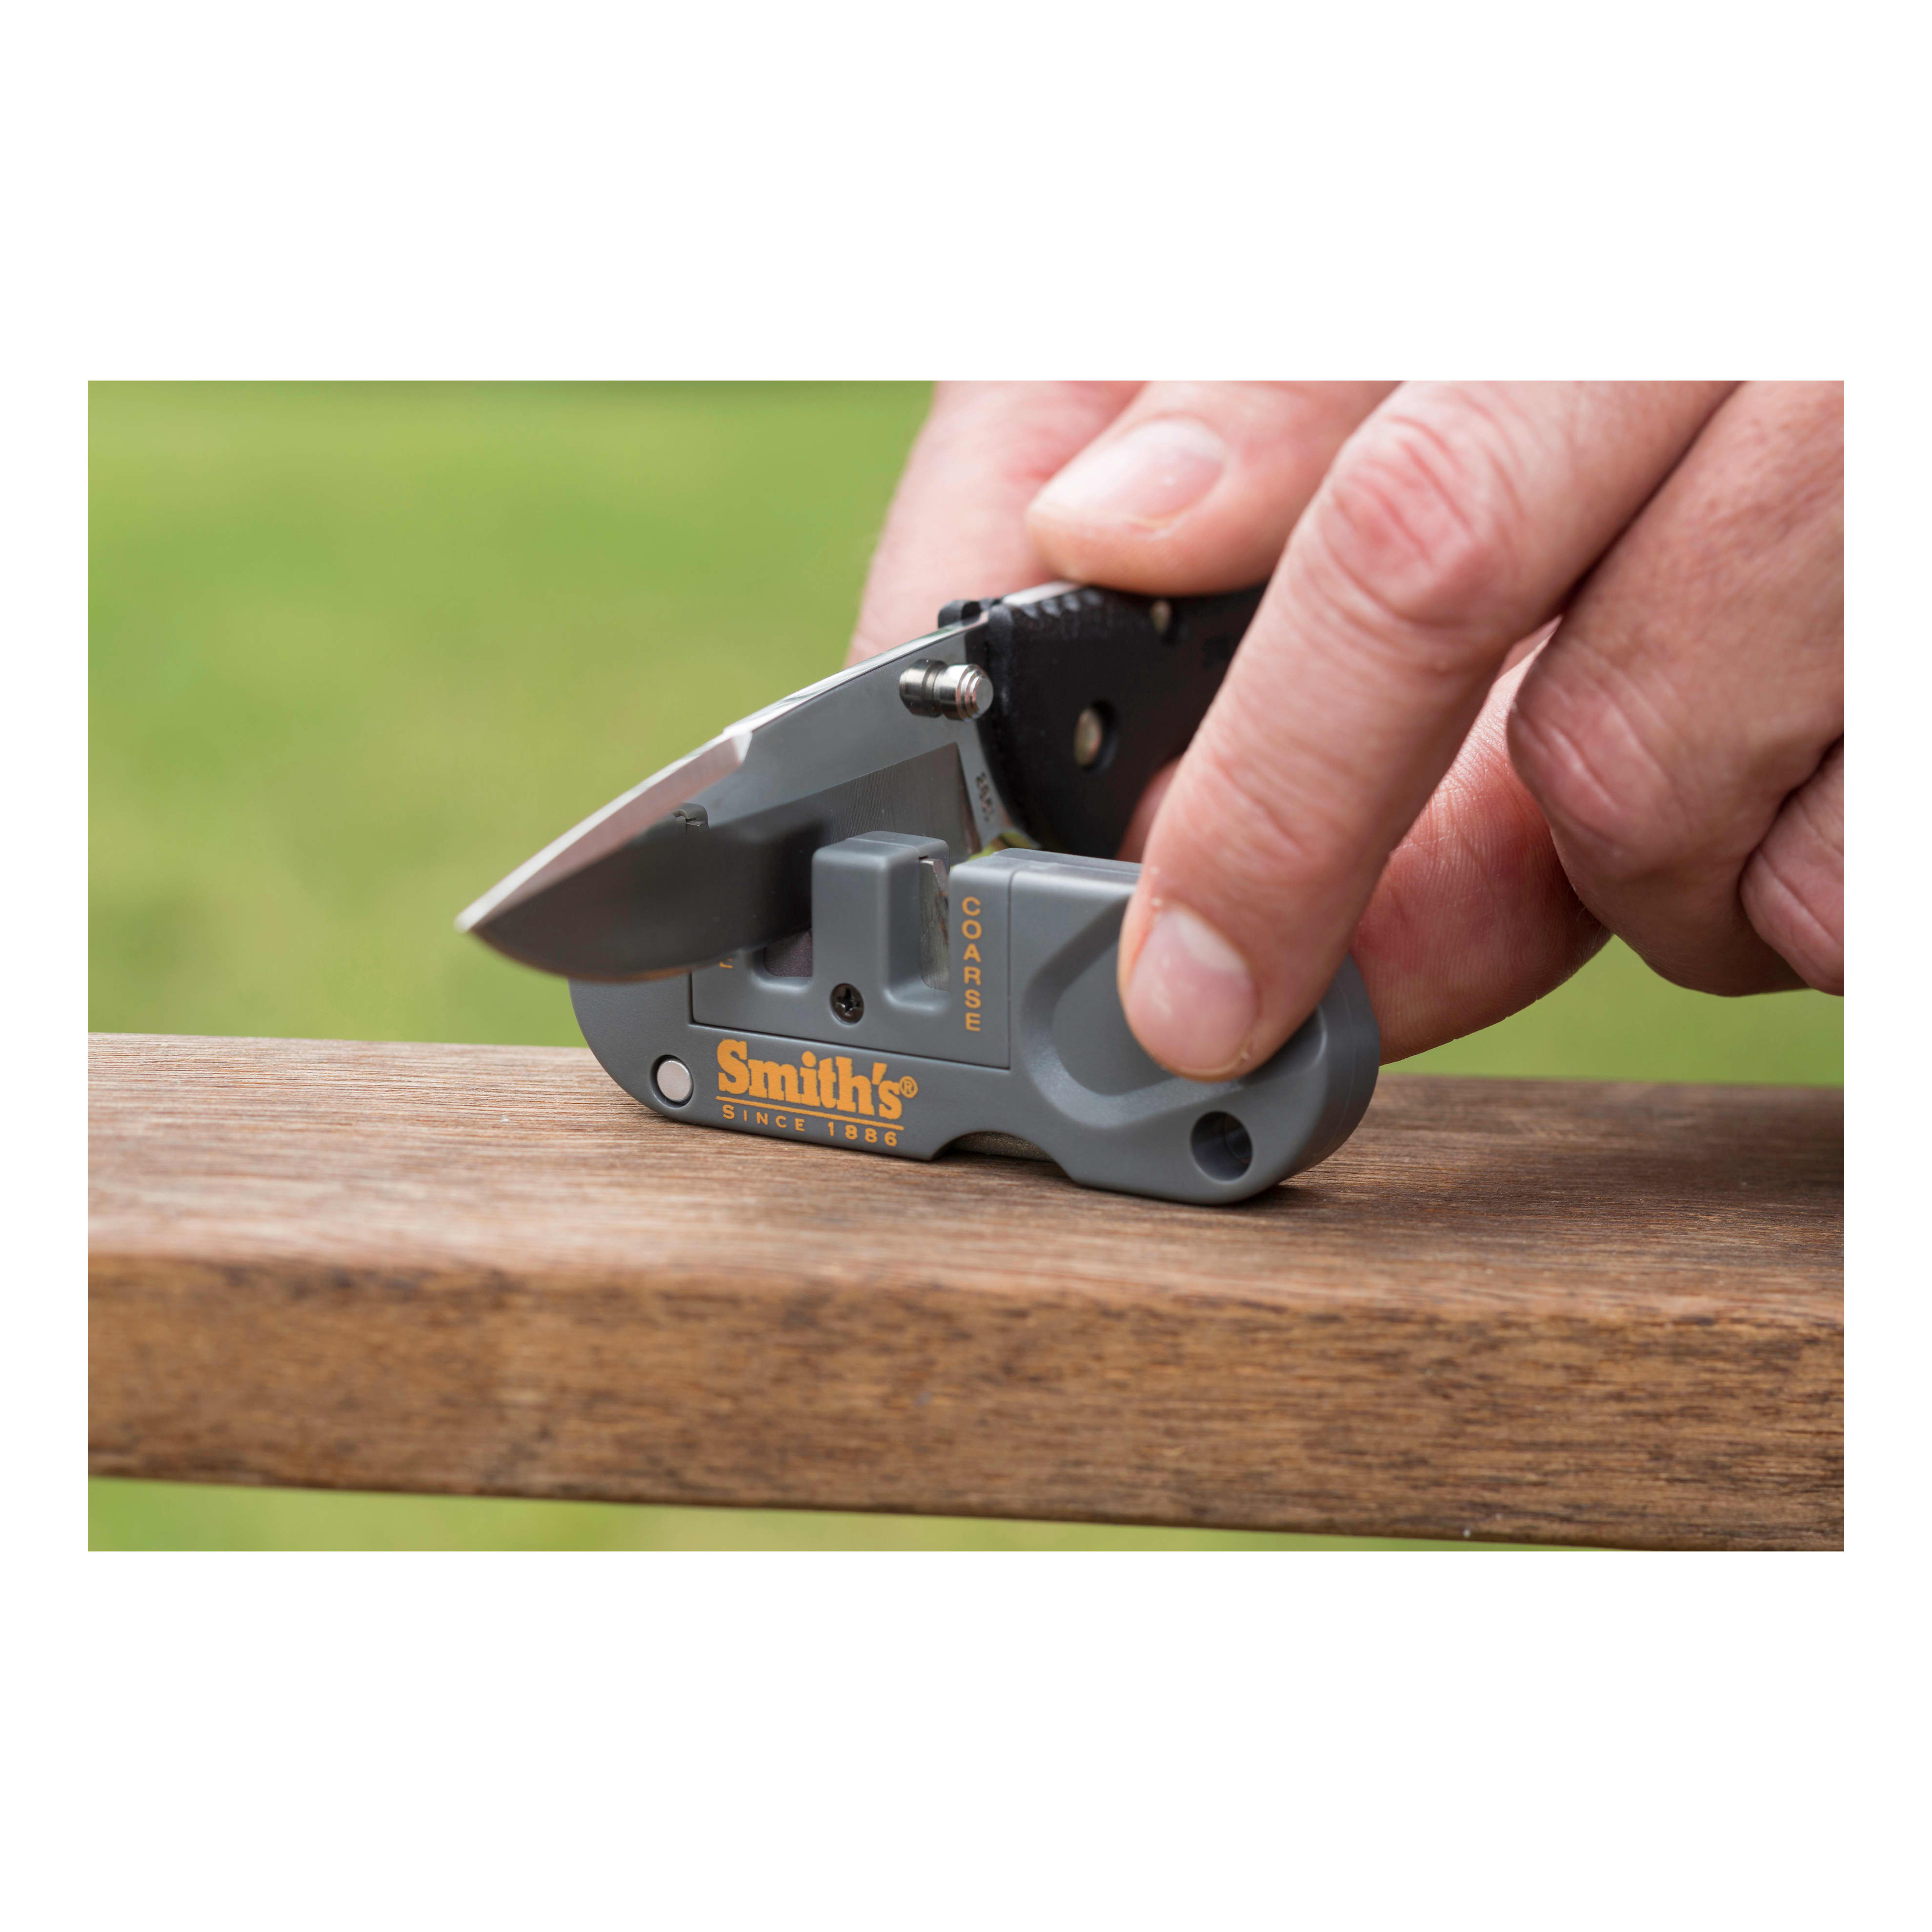 Smith's Pocket Pal Knife Sharpener - In the Field